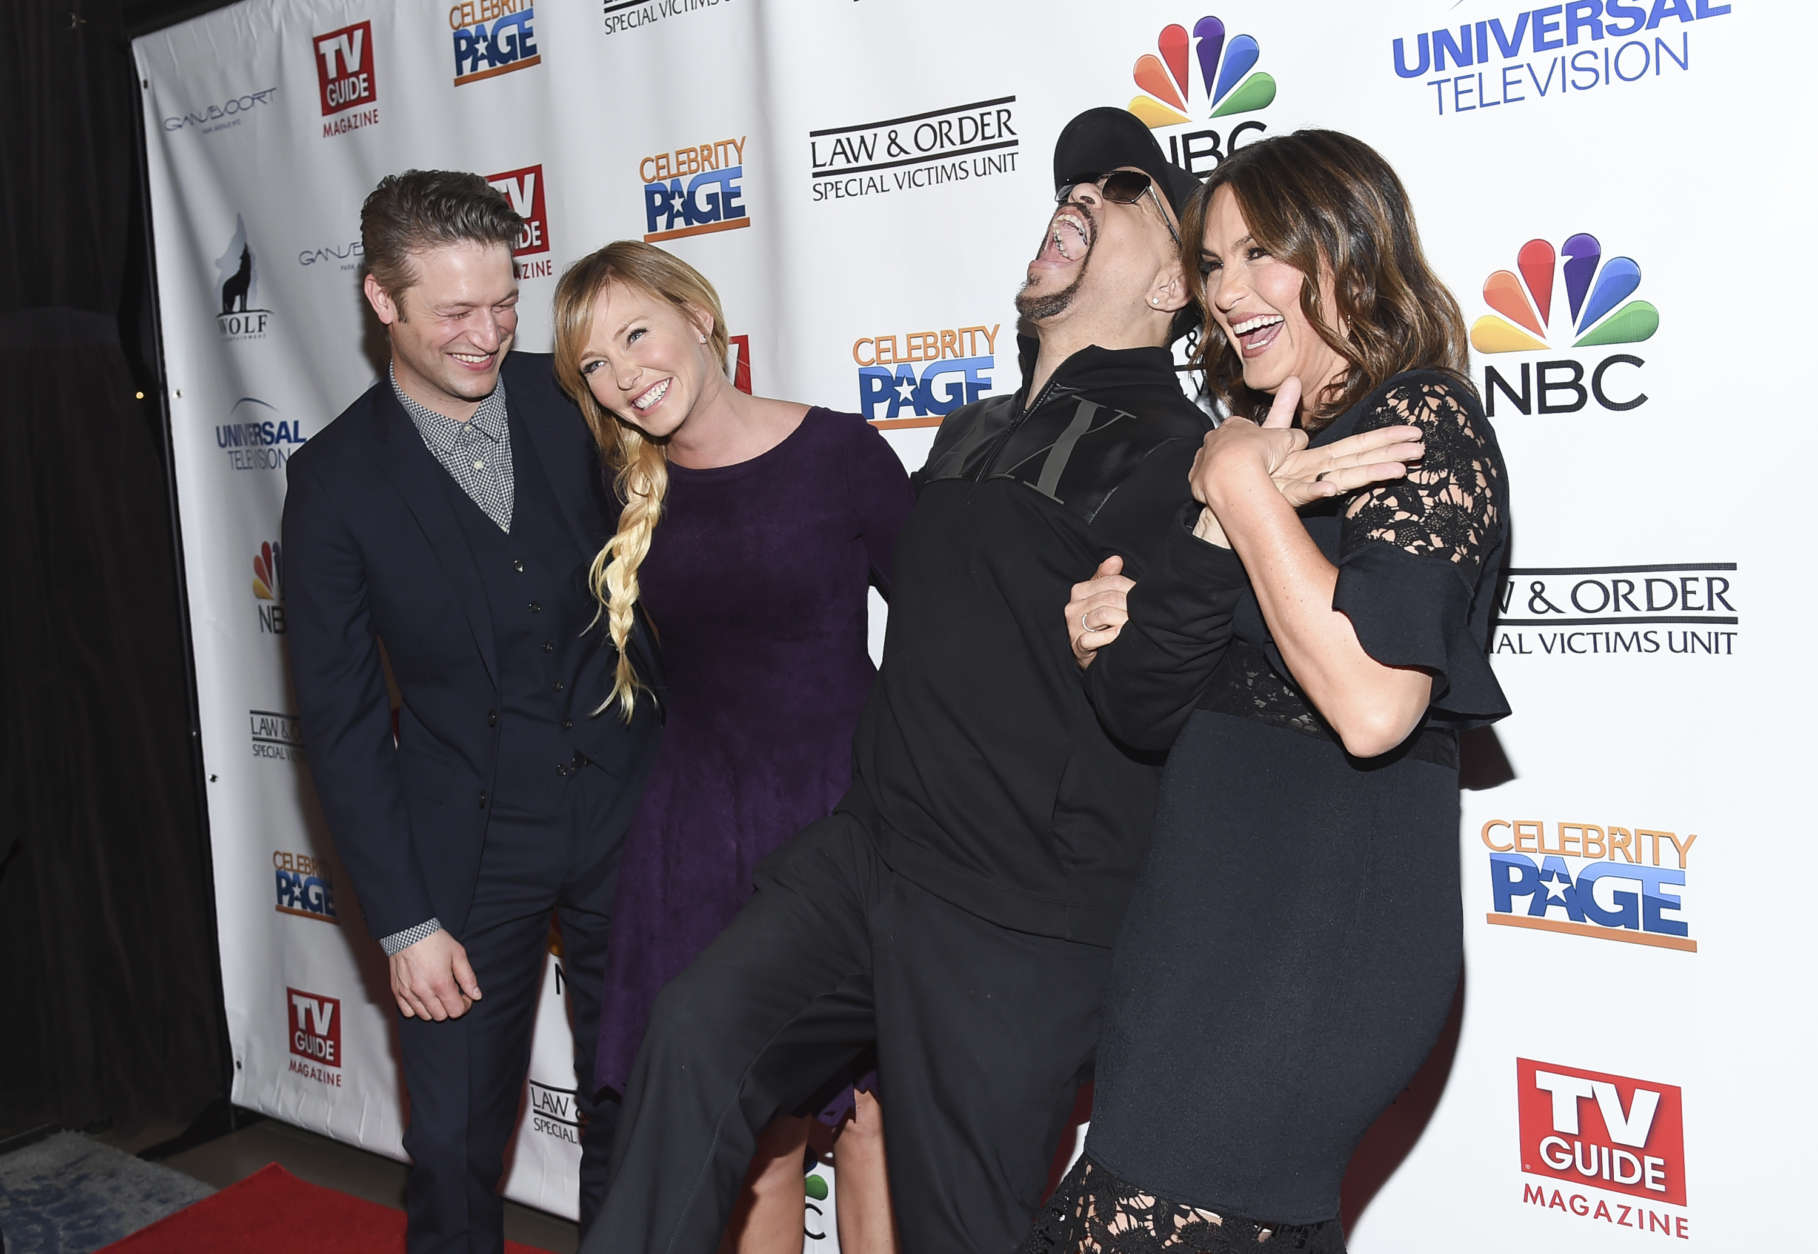 Actors, from left, Peter Scanavino, Kelli Giddish, Ice-T and Mariska Hargitay pose together at TV Guide Magazine's "Law &amp; Order: Special Victims Unit" 400th episode celebration at the Gansevoort Park Avenue on Wednesday, Jan. 11, 2017, in New York. (Photo by Evan Agostini/Invision/AP)